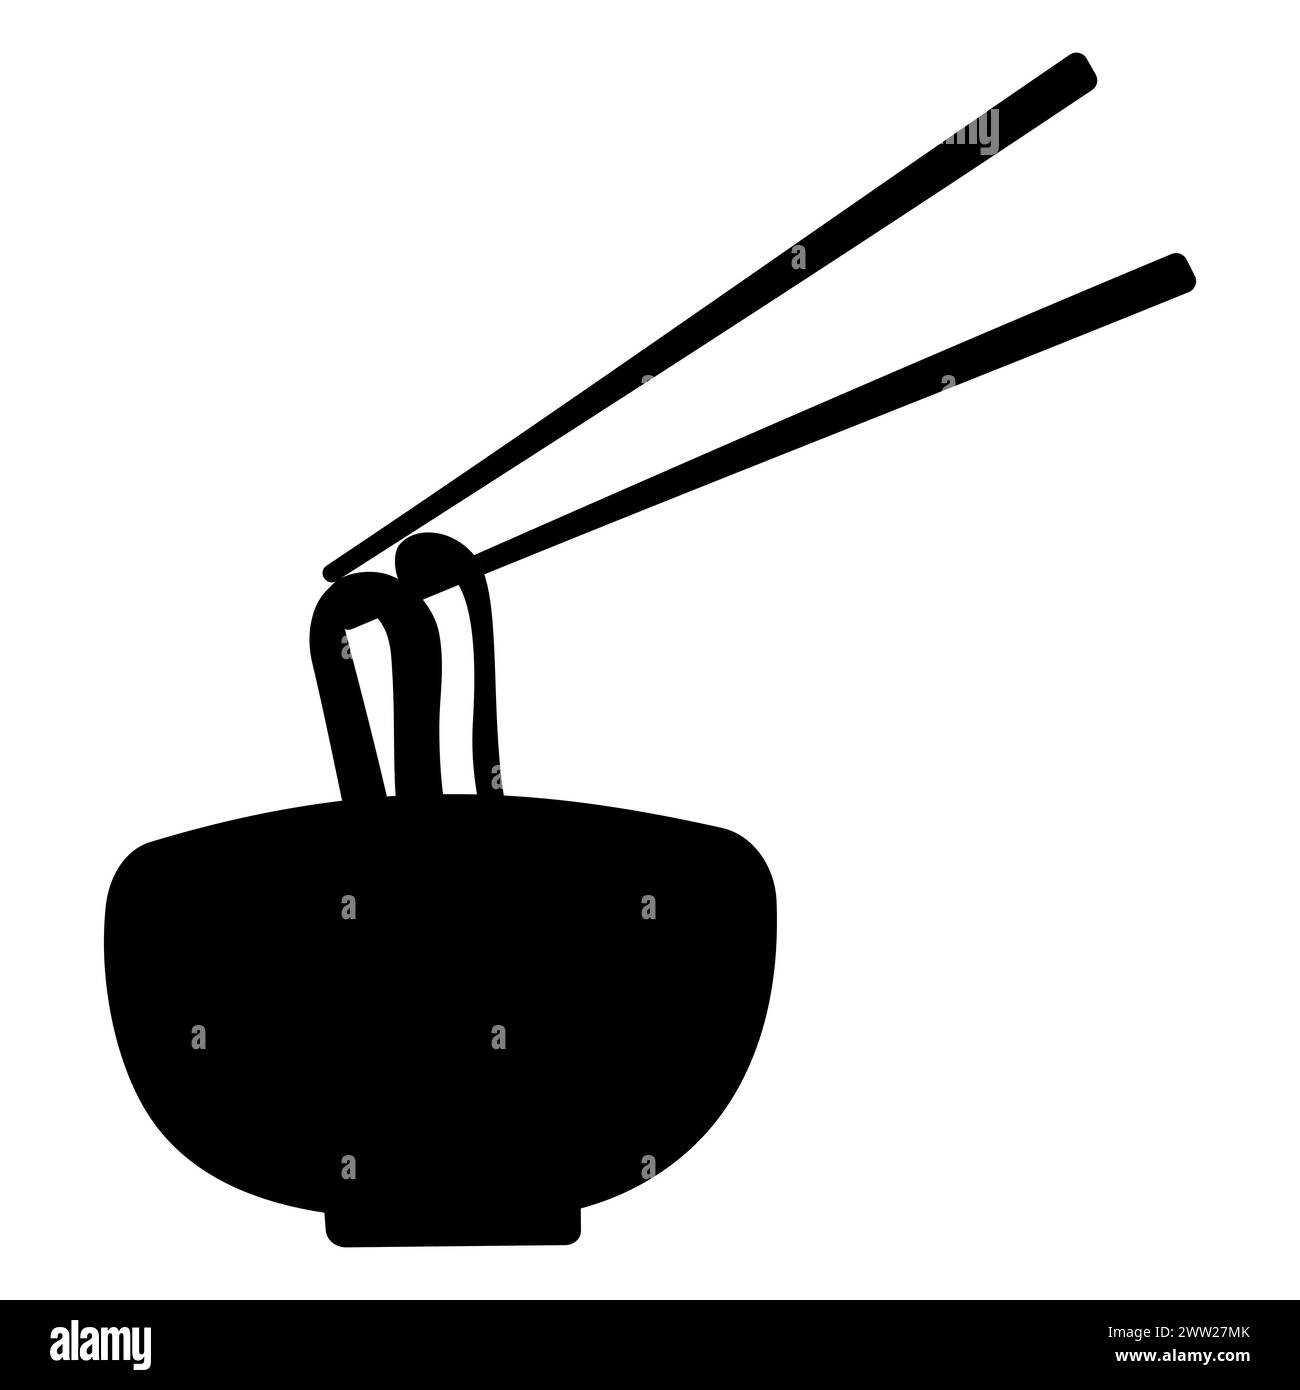 A household supply tool, chopsticks, stick out of a bowl filled with noodles. The balance of carmine soup adds a pop of color to the interior design. Stock Vector